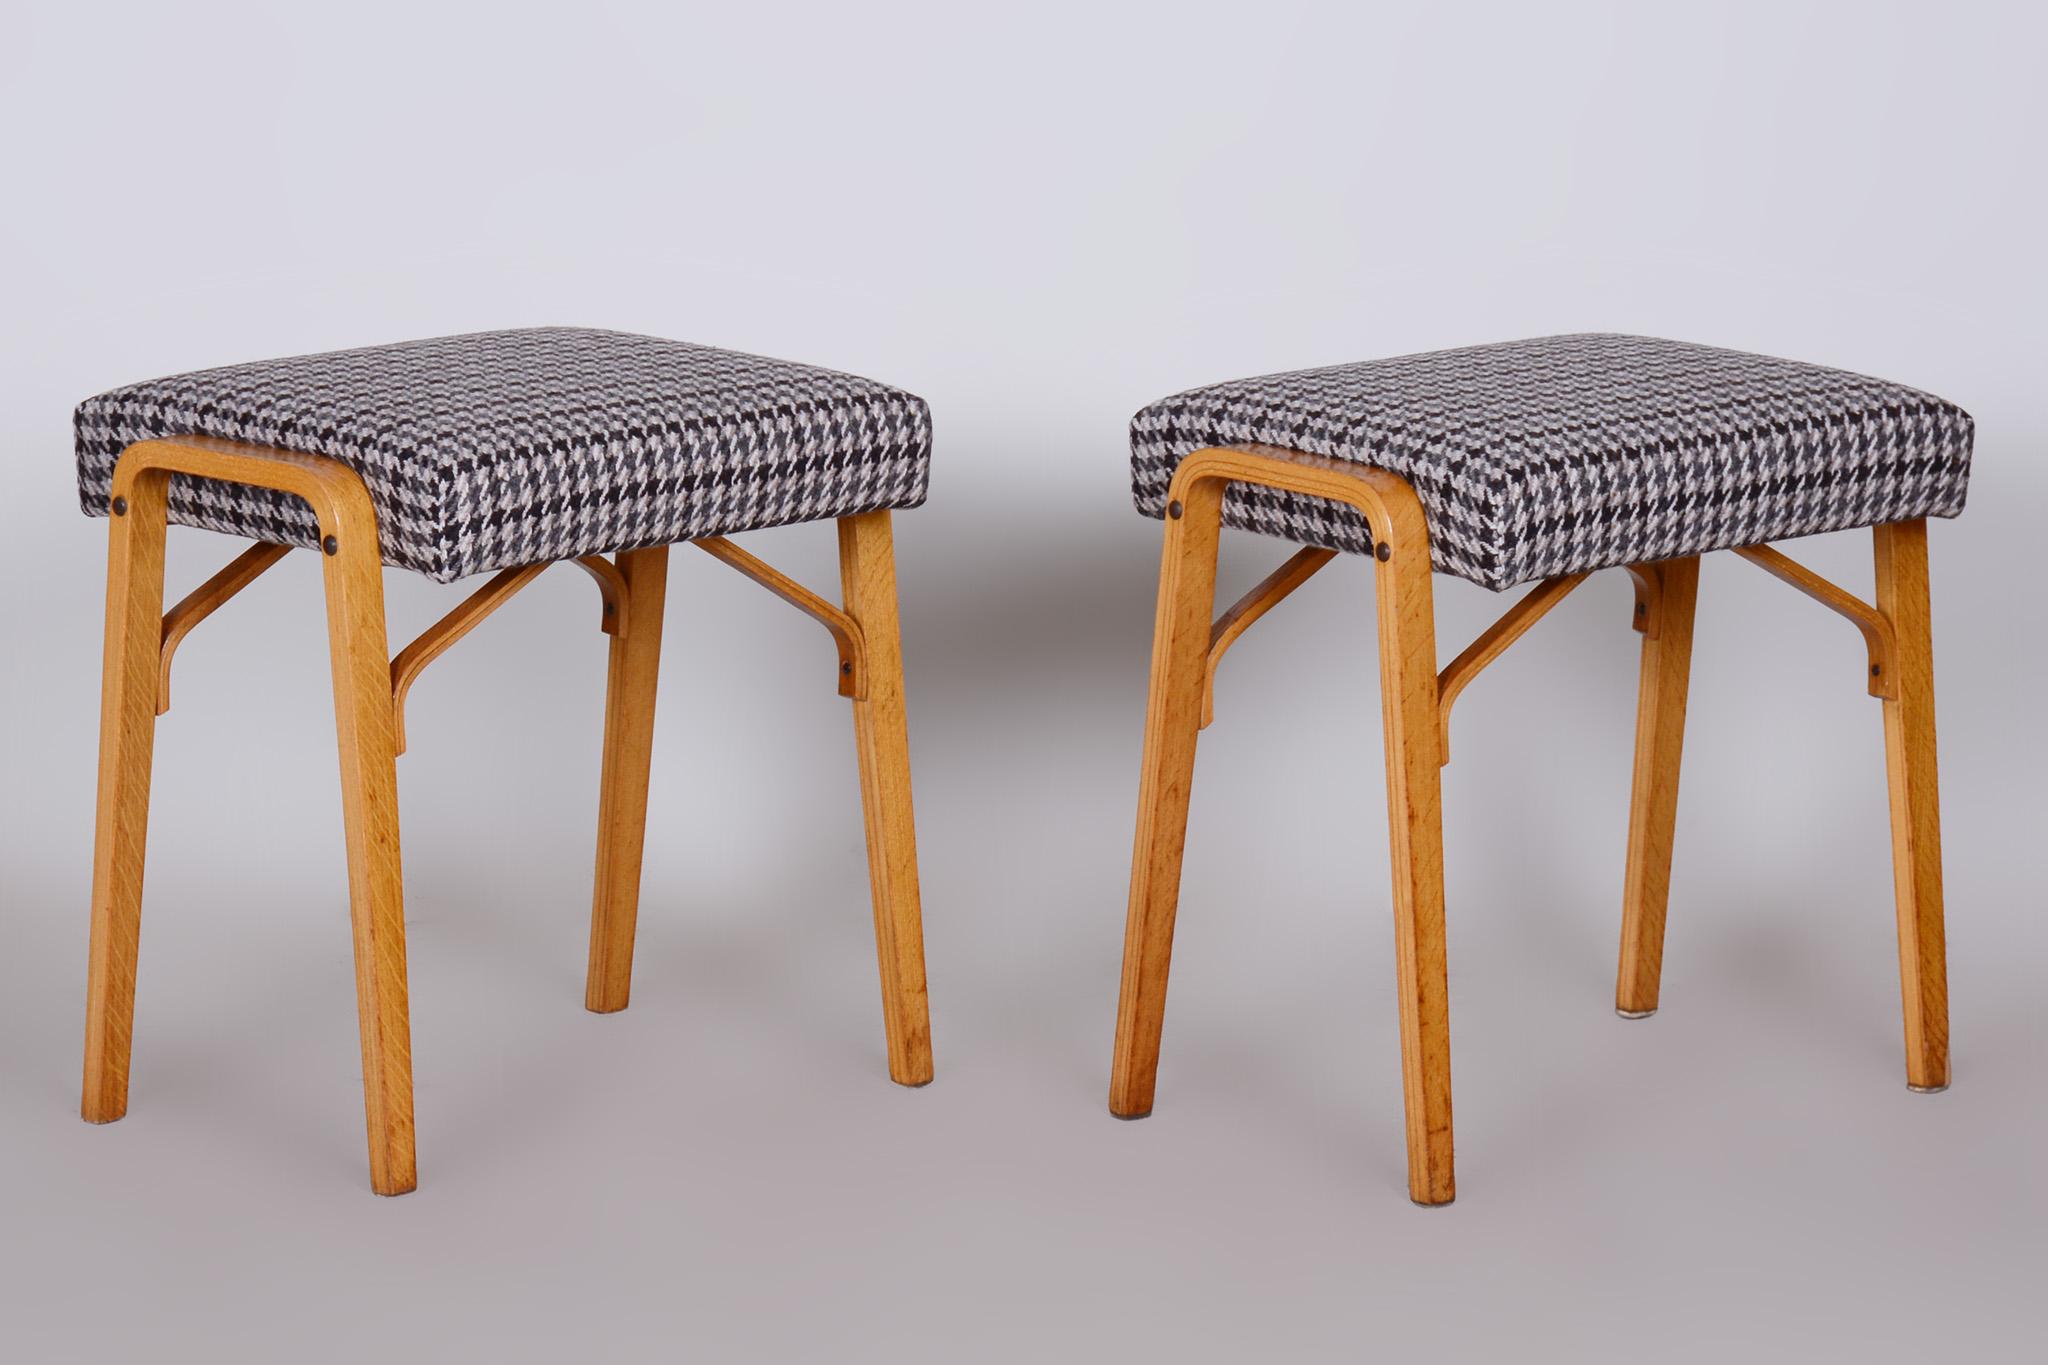 Pair of Midcentury beech stools

Architect: Ludvik Volak
Maker: Drevopodnik Holesov
Source: Czechia (Czechoslovakia)
Period: 1950-1959
Material: Beech, Fabric, Upholstery, Plywood

Stable construction made of shaped plywood.
Refreshed